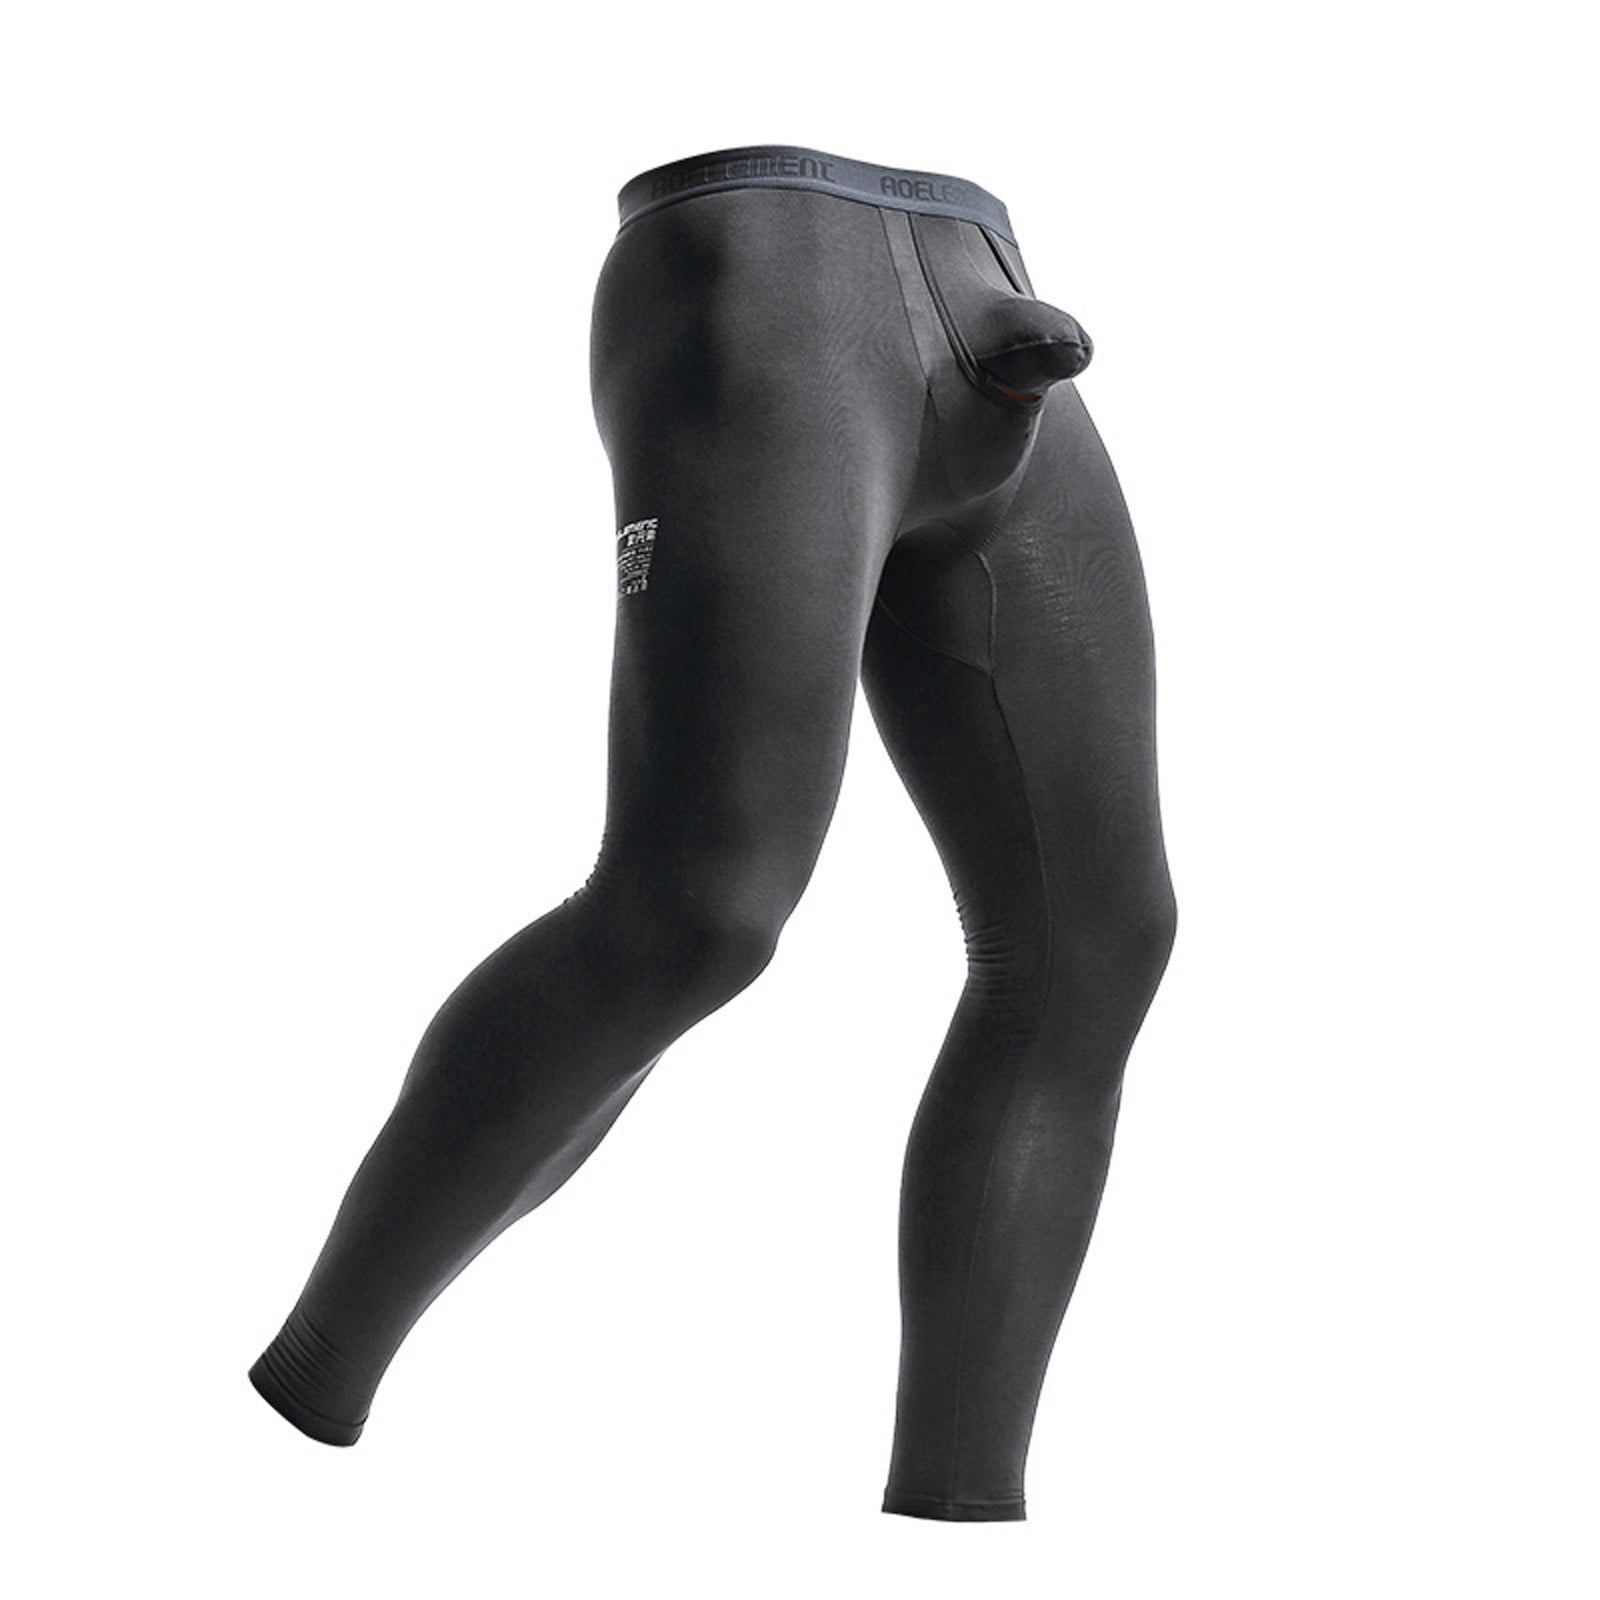 Men's Thermal Compression Pants Athletic Leggings Base Layer Bottoms  Underwear Slim Legging Tight Pant Trousers 